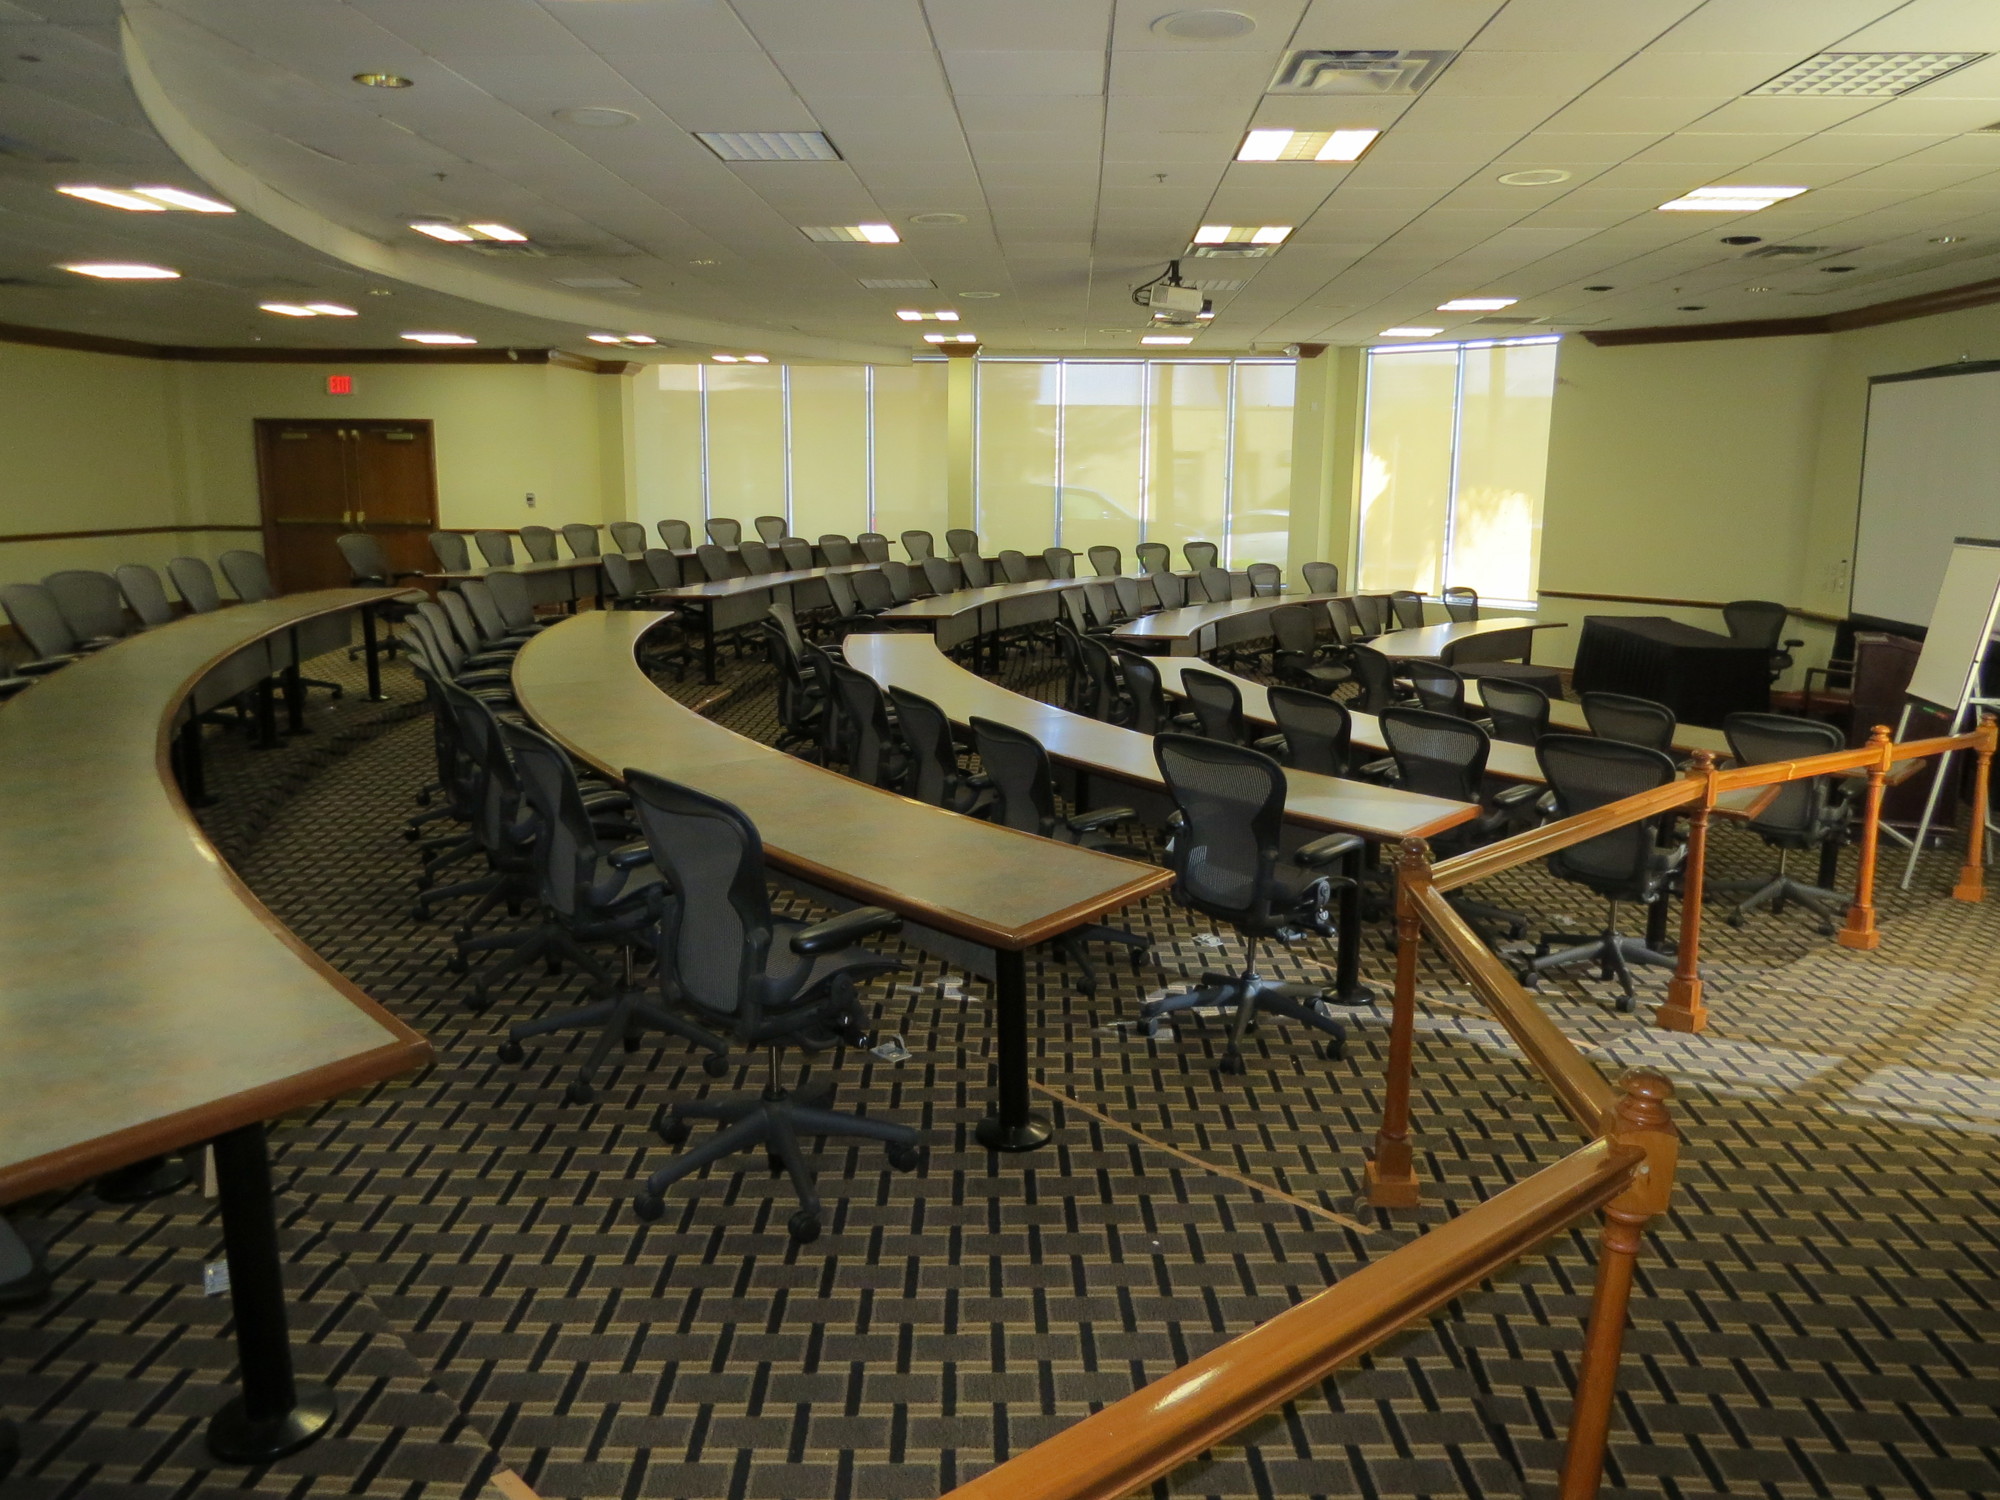 The hotel’s Compass Room meeting space seats 85 theater-style and accommodates 135 seats total.